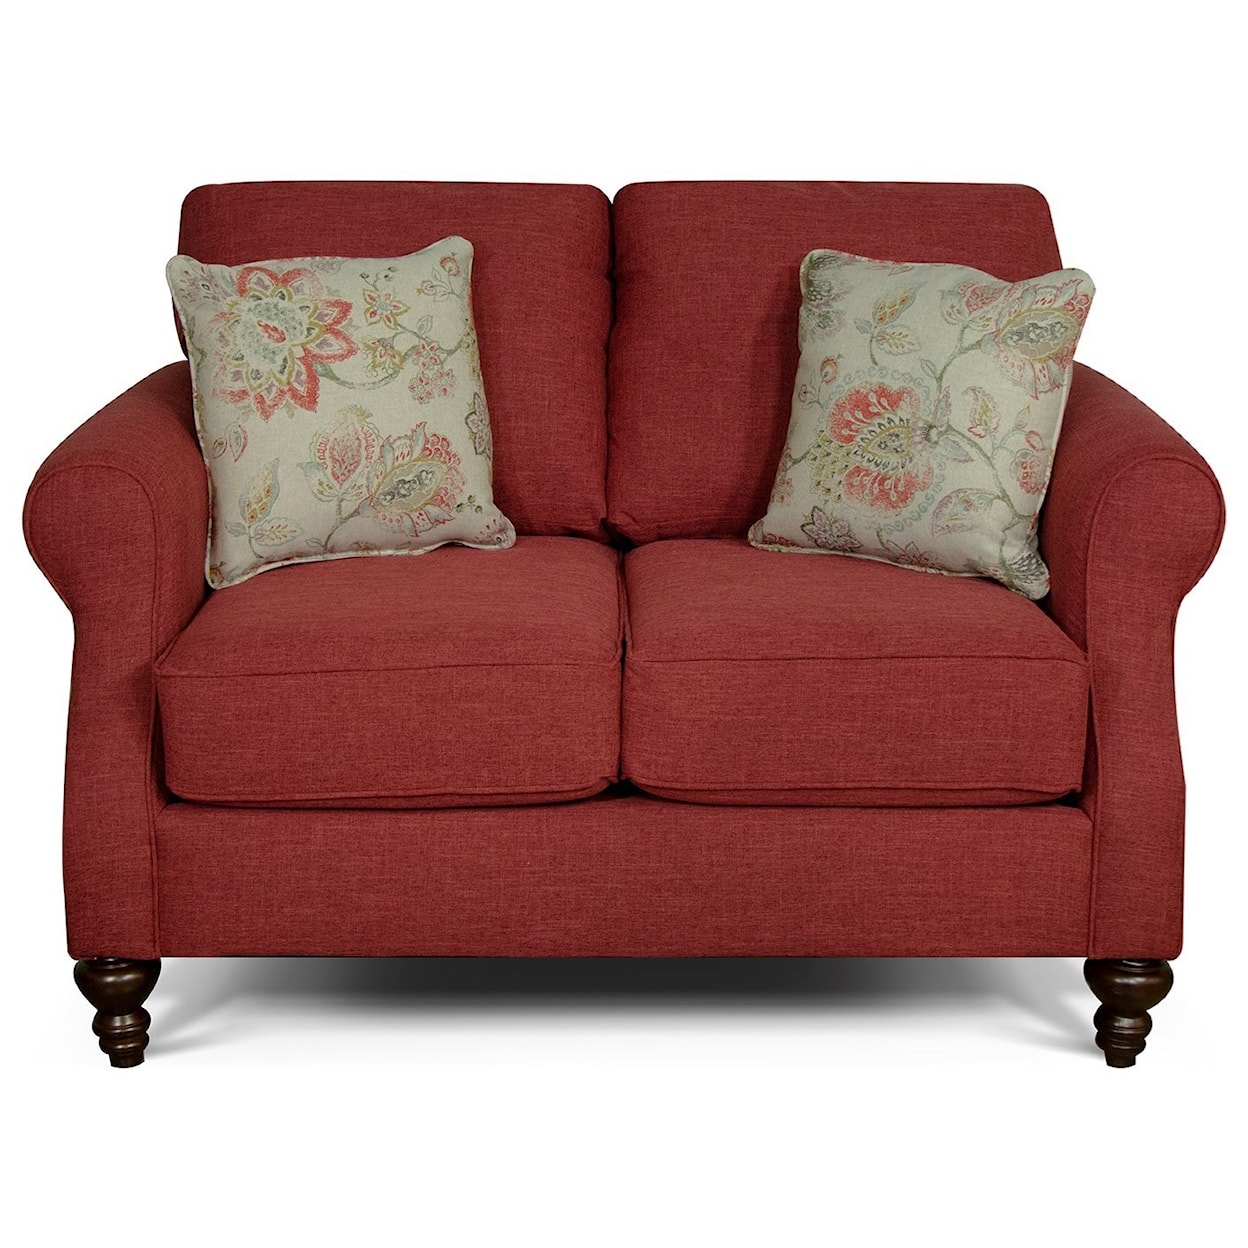 England Brinson and Jones Small Scale Loveseat